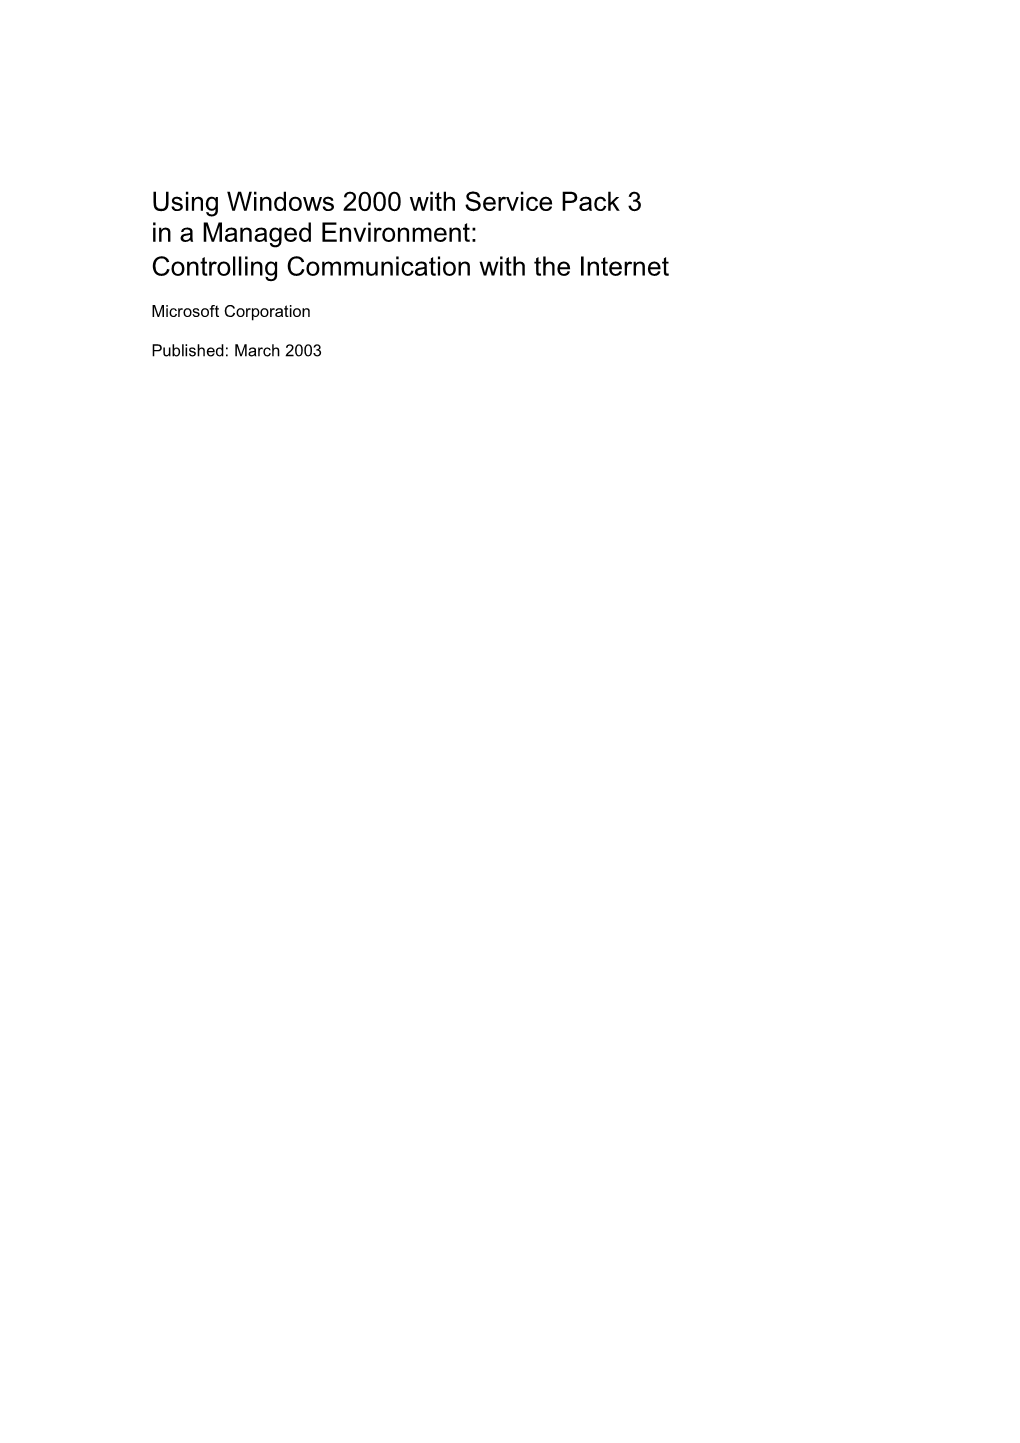 Using Windows 2000 with Service Pack 3 in a Managed Environment: Controlling Communication with the Internet